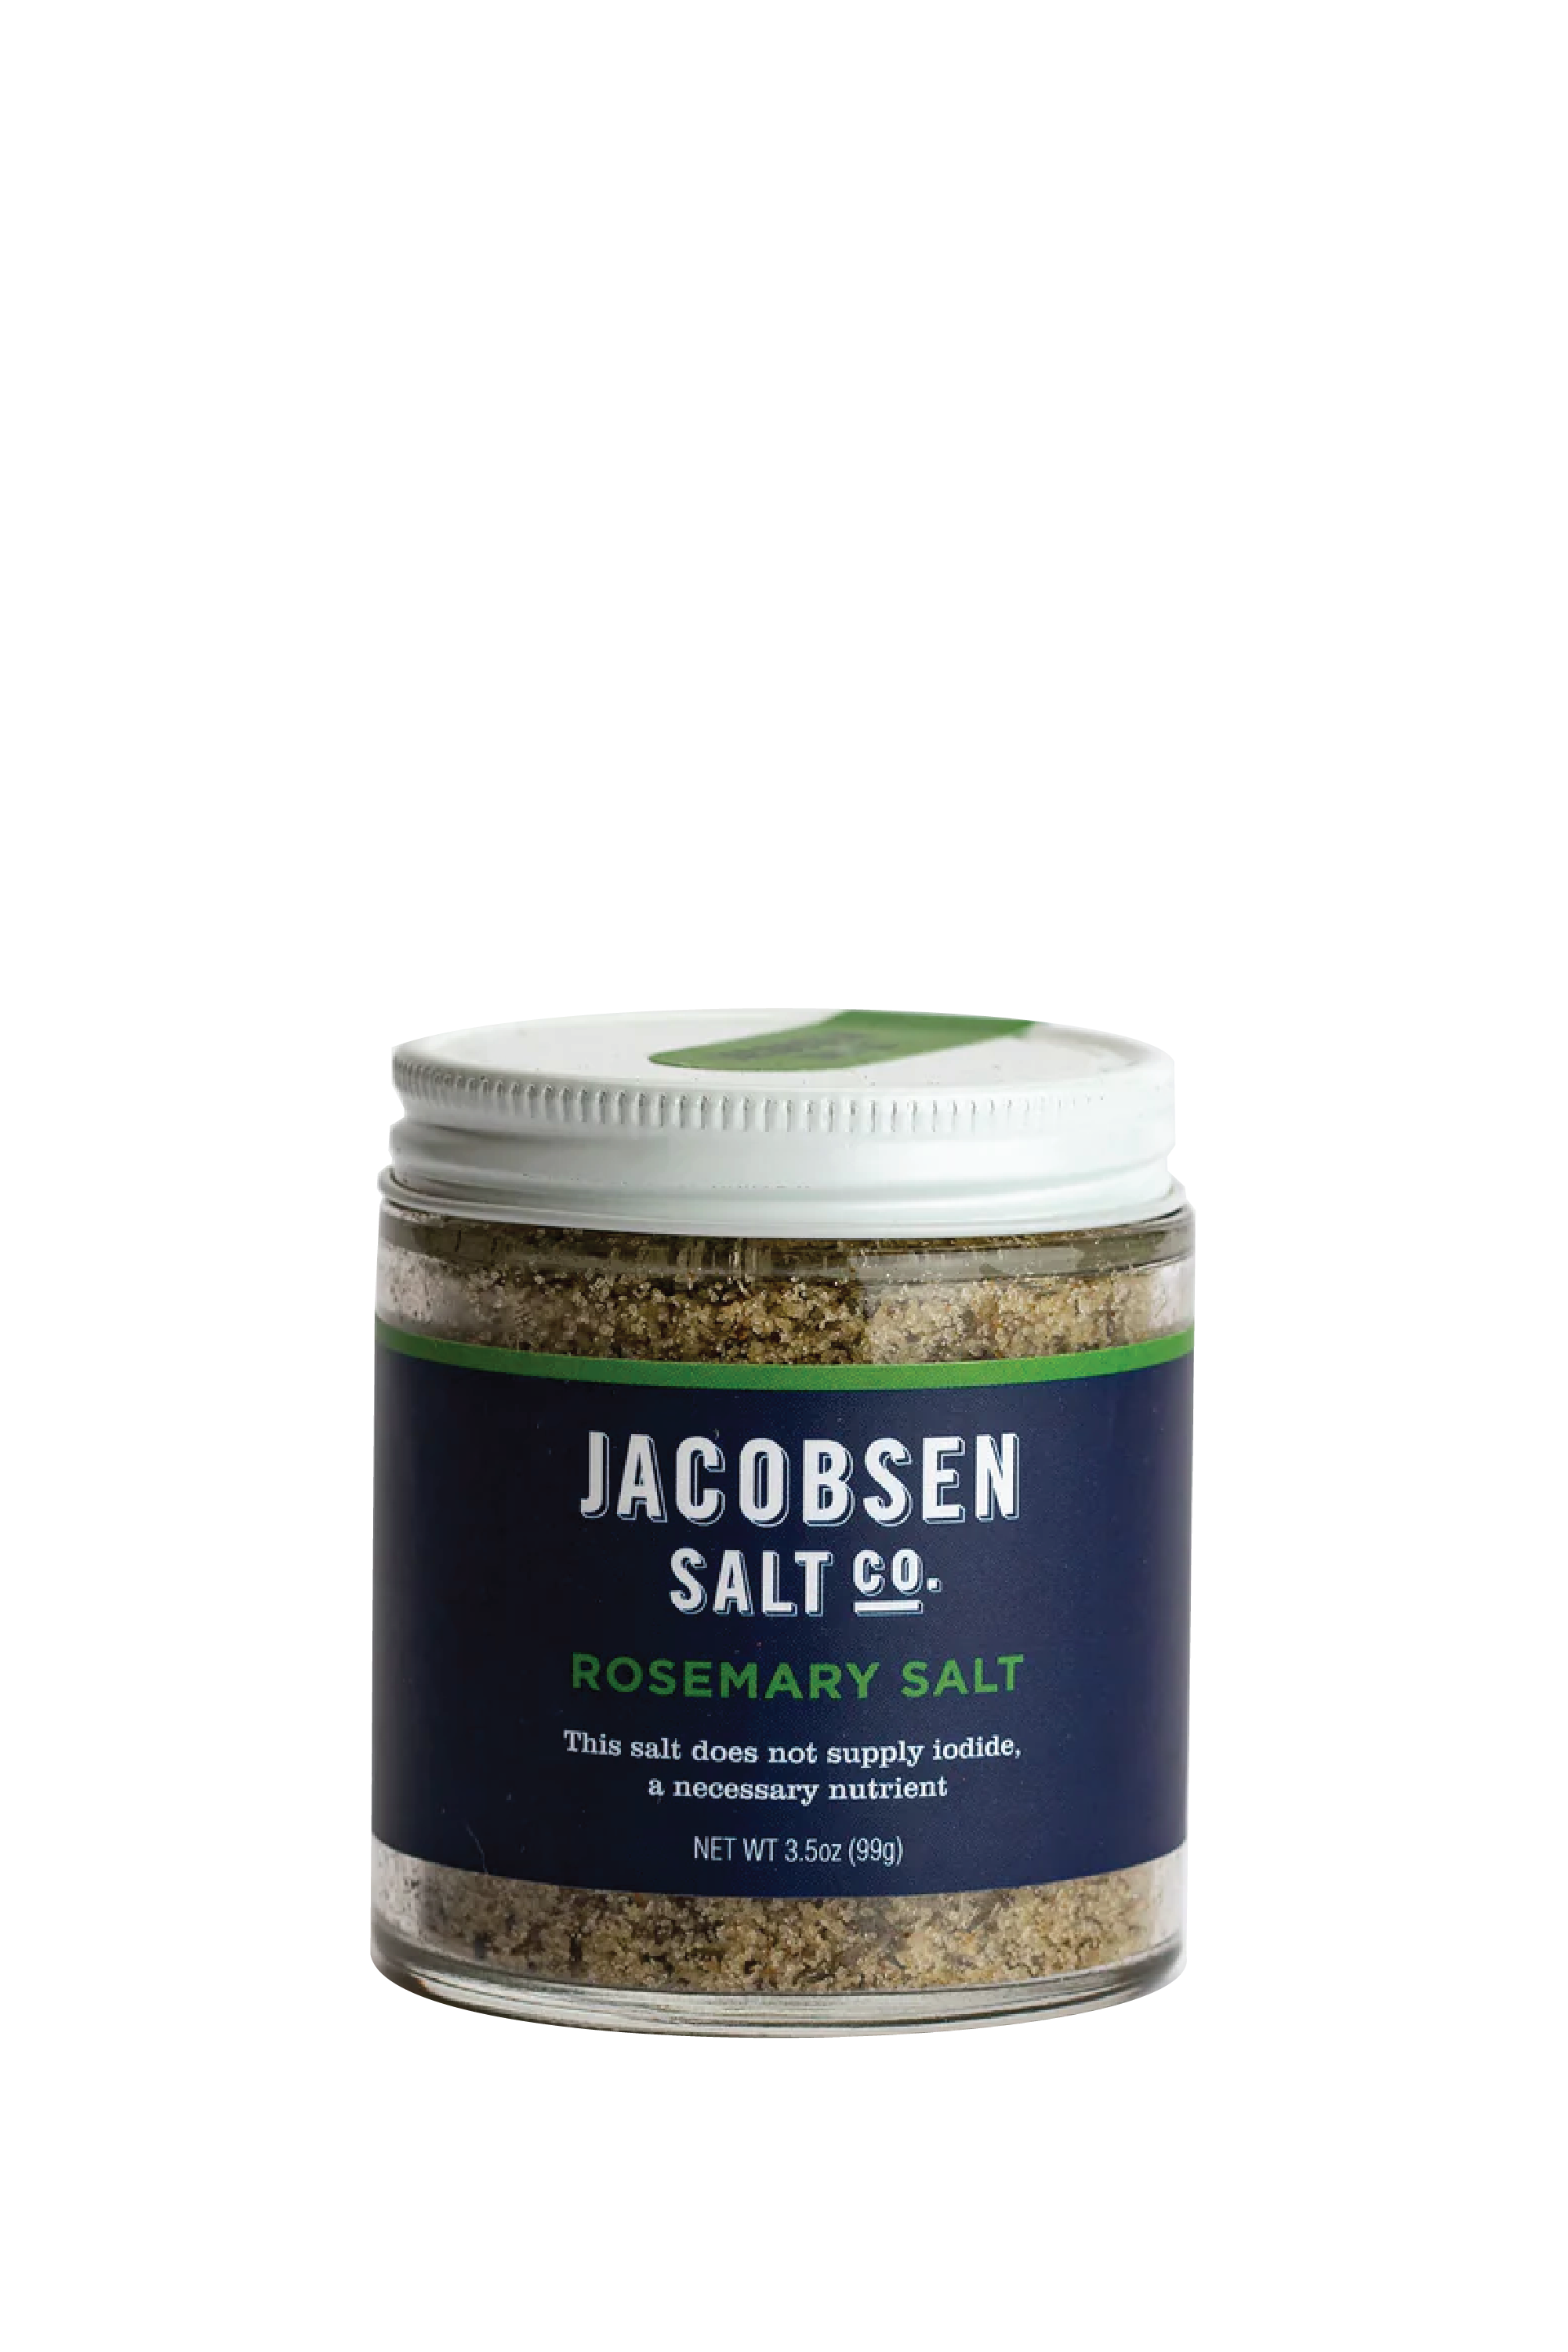 A Photo Of Rosemary Salt in a glass jar with a blue label. White Background.